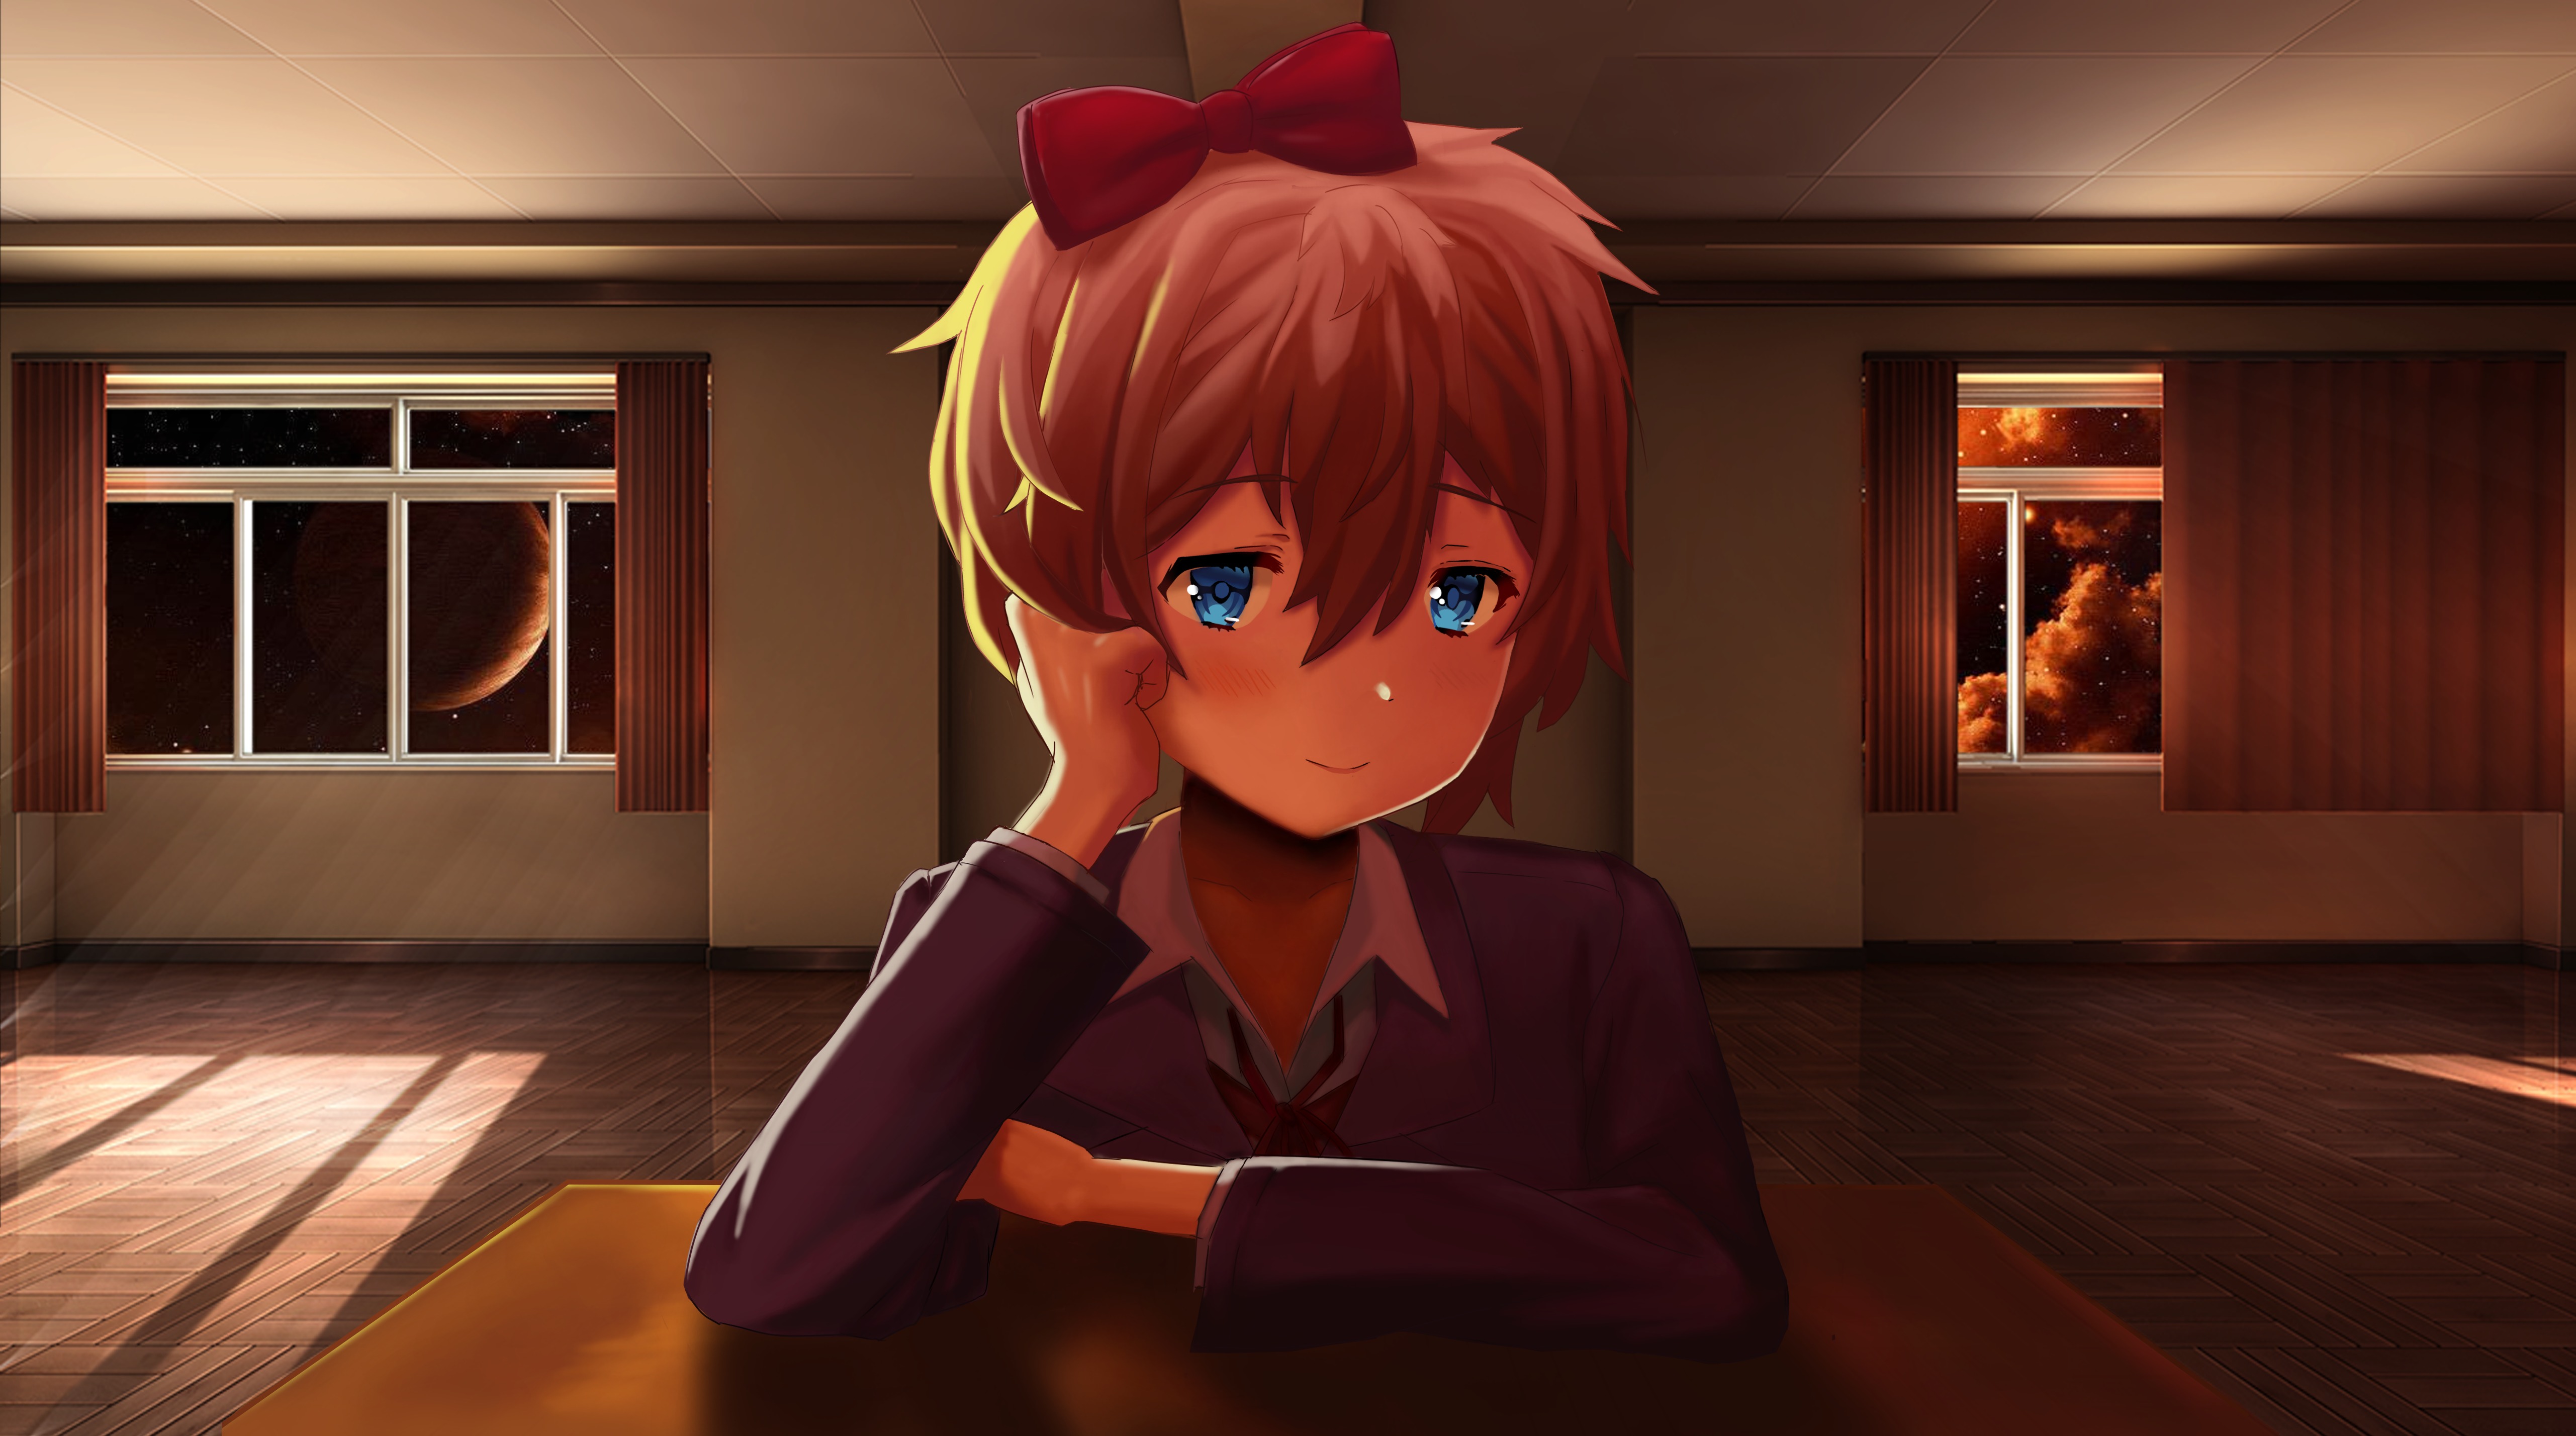 Could Doki Doki Literature Club Be Made Into an Anime?